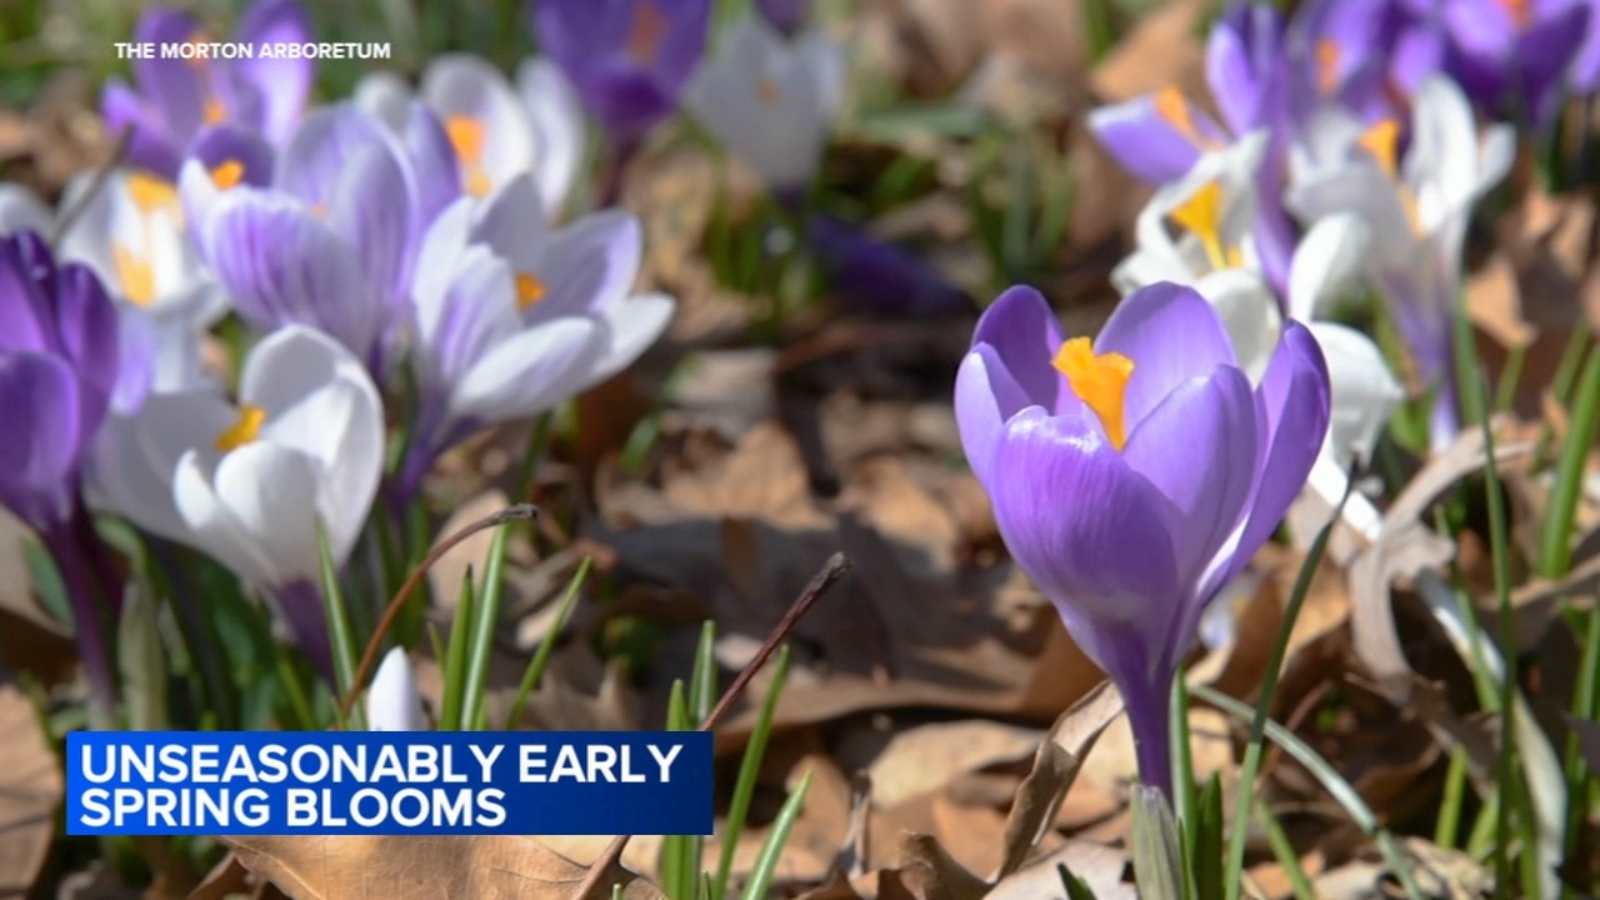 Morton Arboretum plant expert joins to discuss how Chicago weather patterns are affecting plant health, causing early blooms [Video]